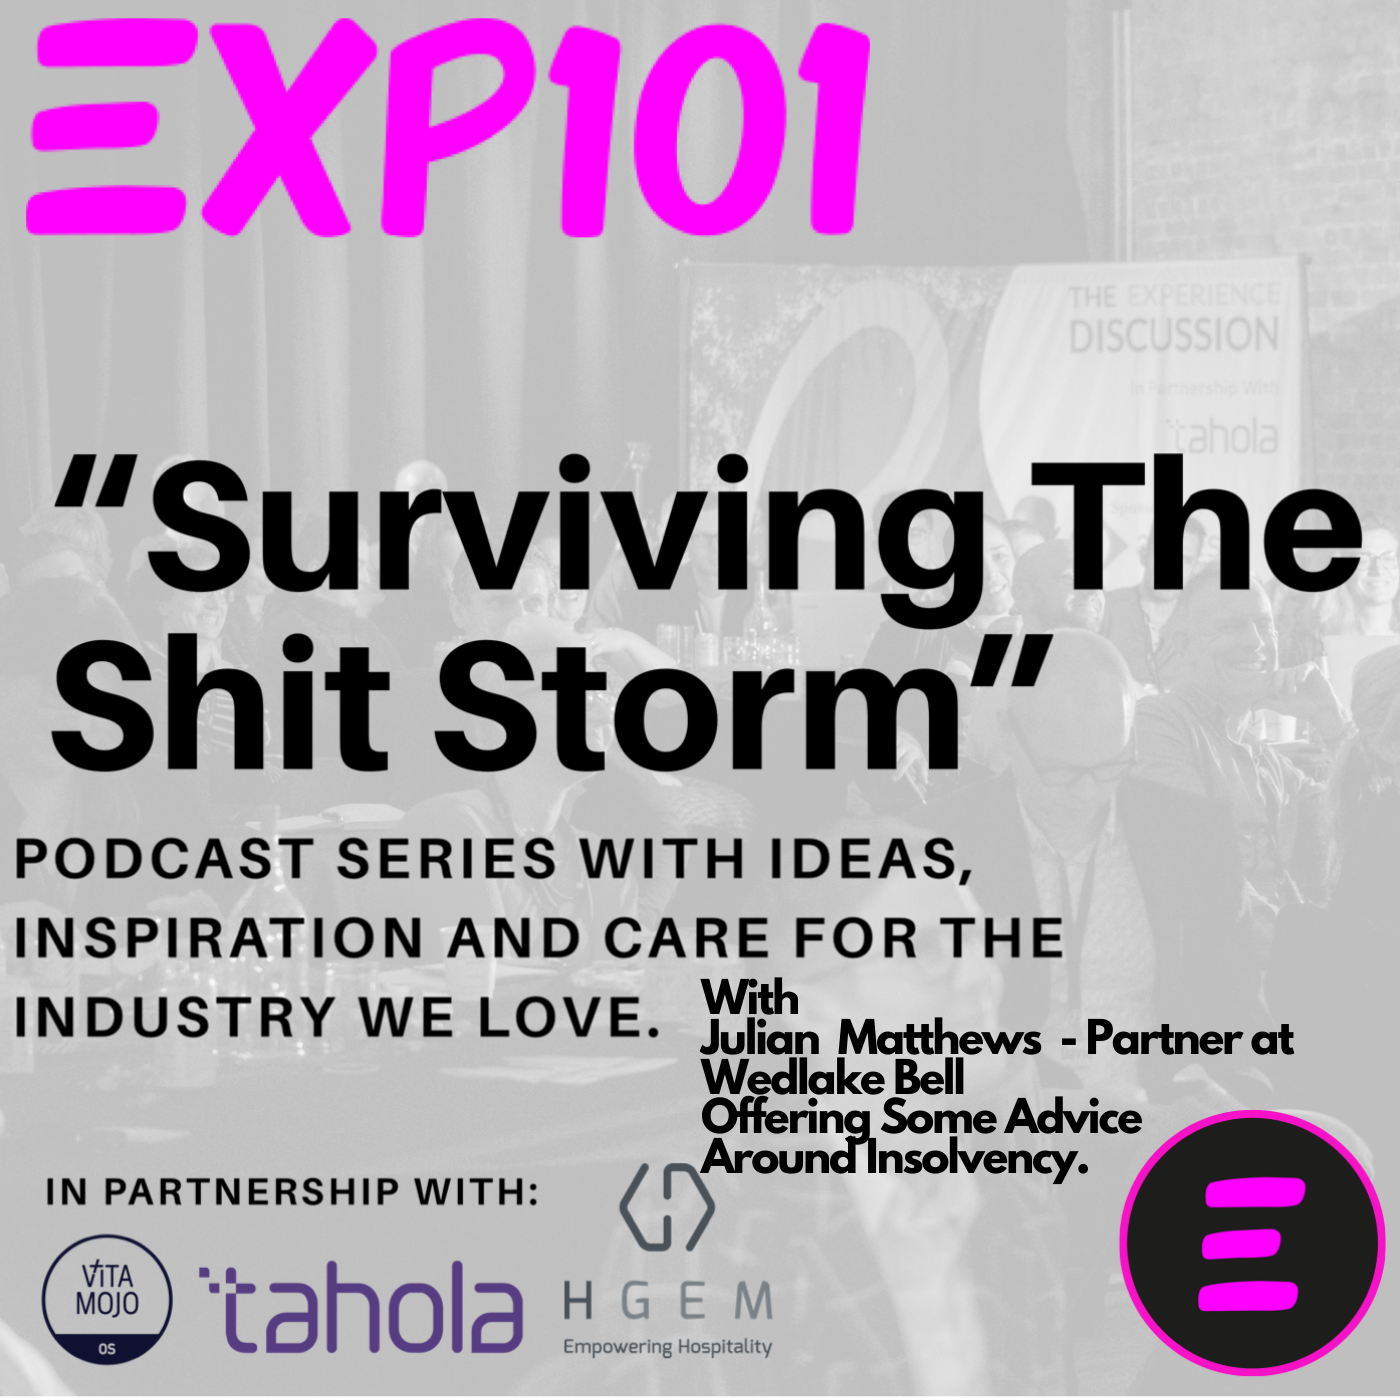 Surviving The Shit Storm Episode 8 with Julian Matthews, Solicitor and Partner at Wedlake Bell LLP Image